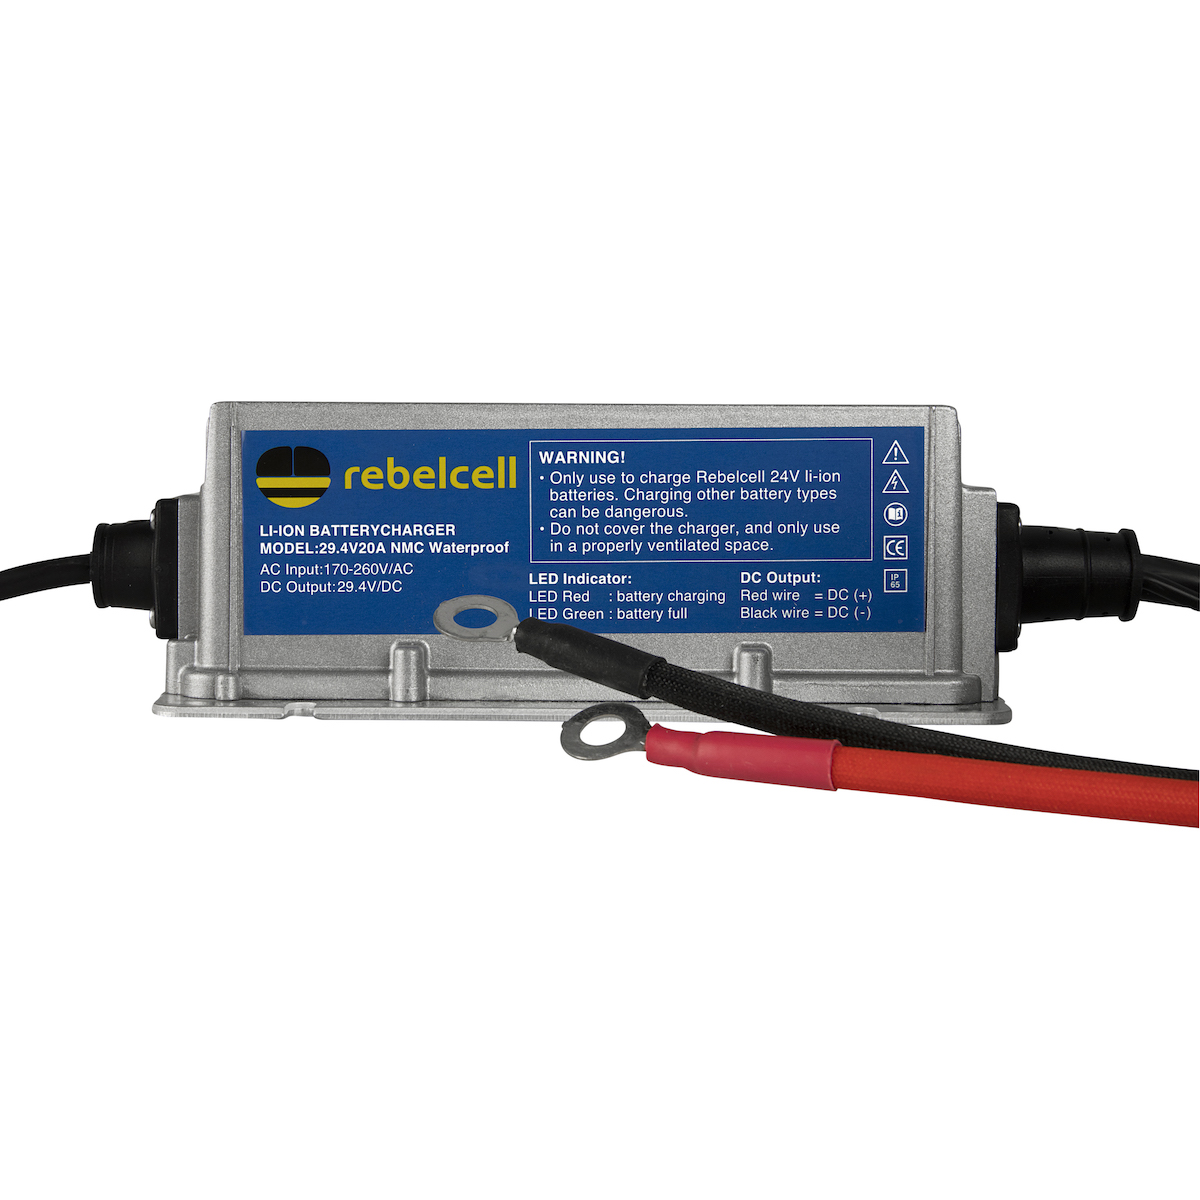 Rebelcell waterproof charger 29.4V20A product image